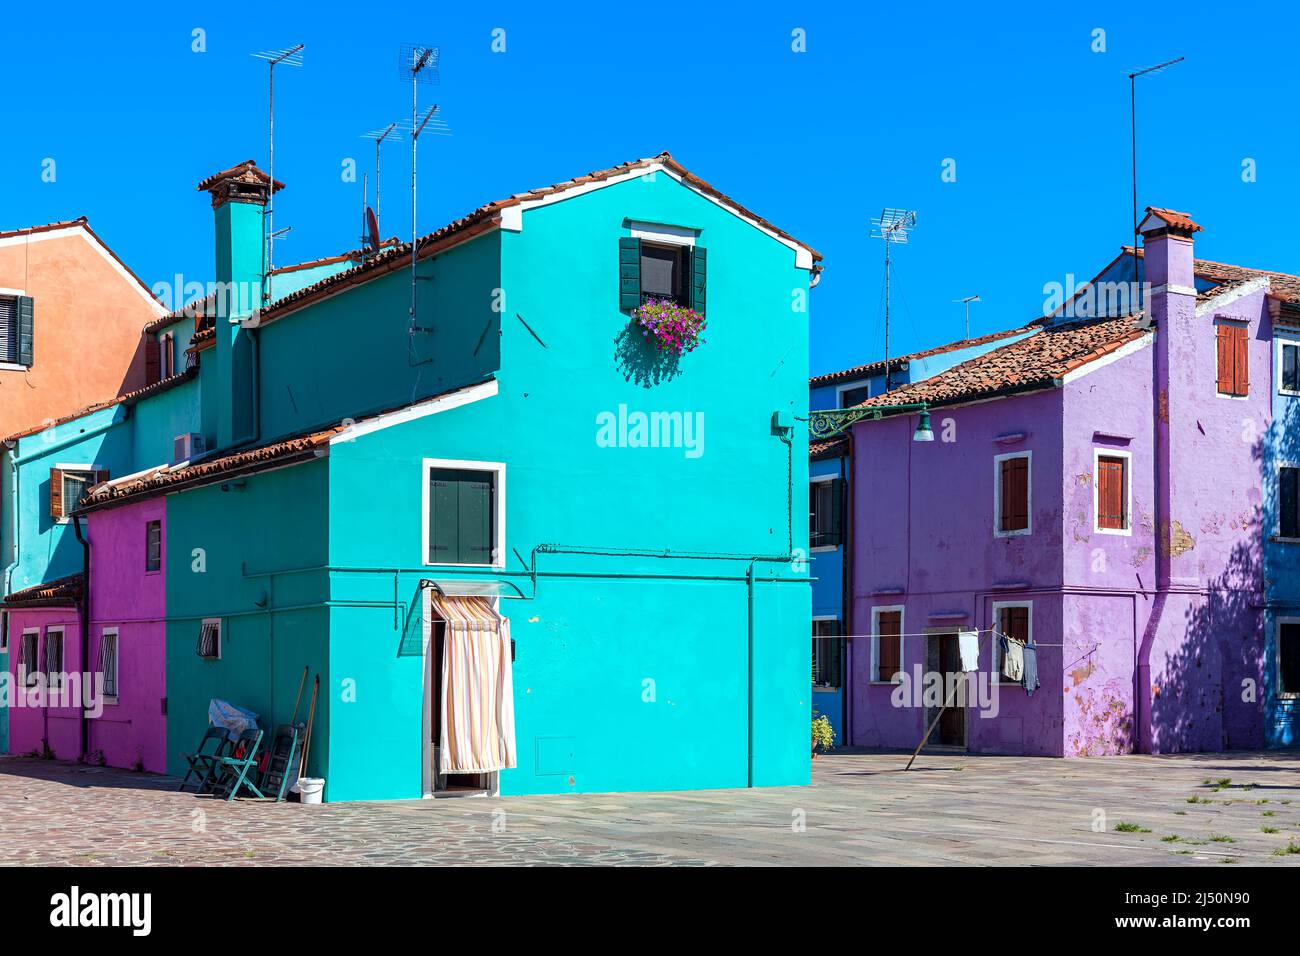 Typical colorful painted houses under blue sky on Burano island in Venice, Italy. Stock Photo